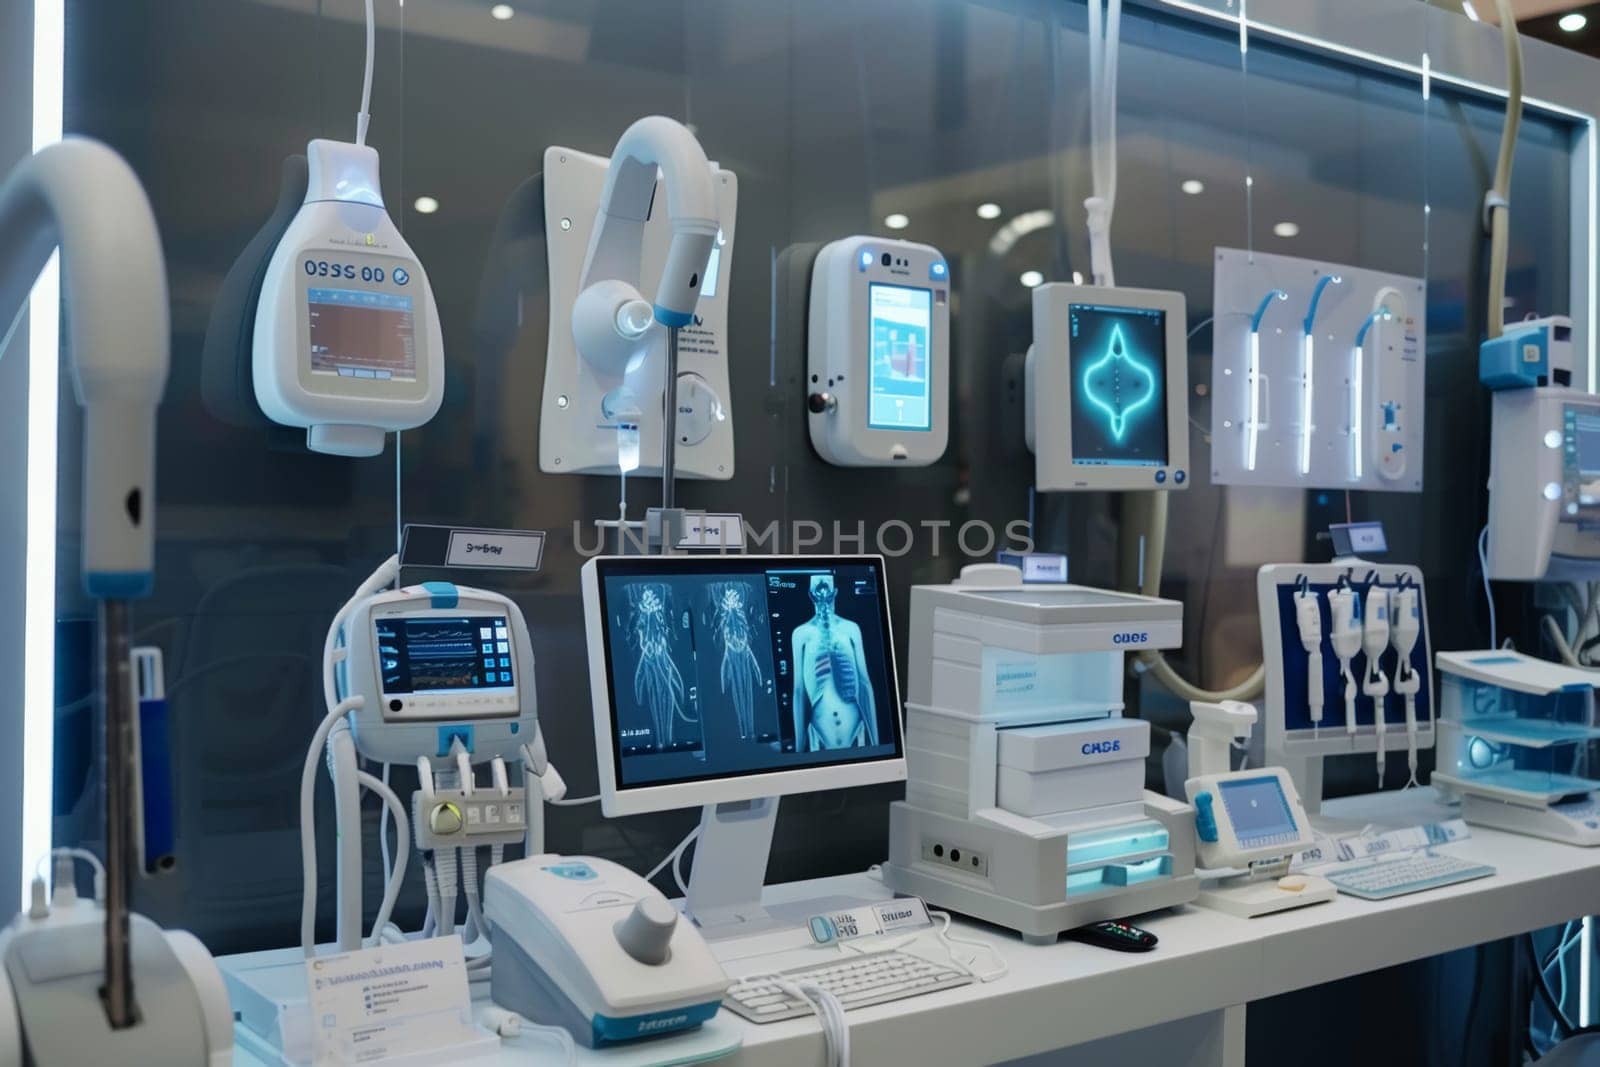 High-tech medical equipment on display with monitors and machines showcasing vital sign metrics in a blurred conference background